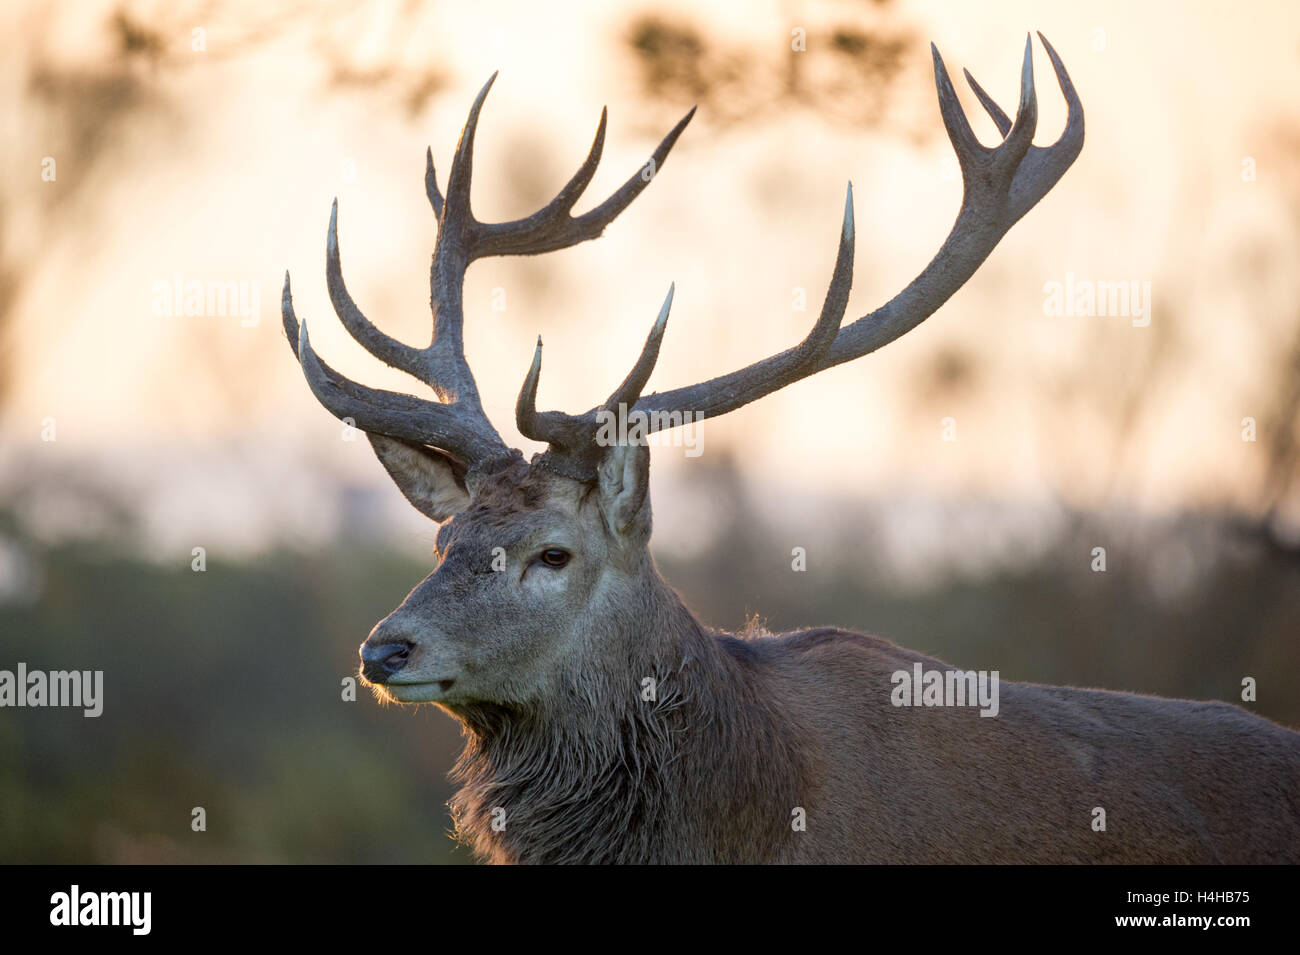 Red Deer Close up Portrait in daylight. The image shows a stag in it's environment. Stock Photo